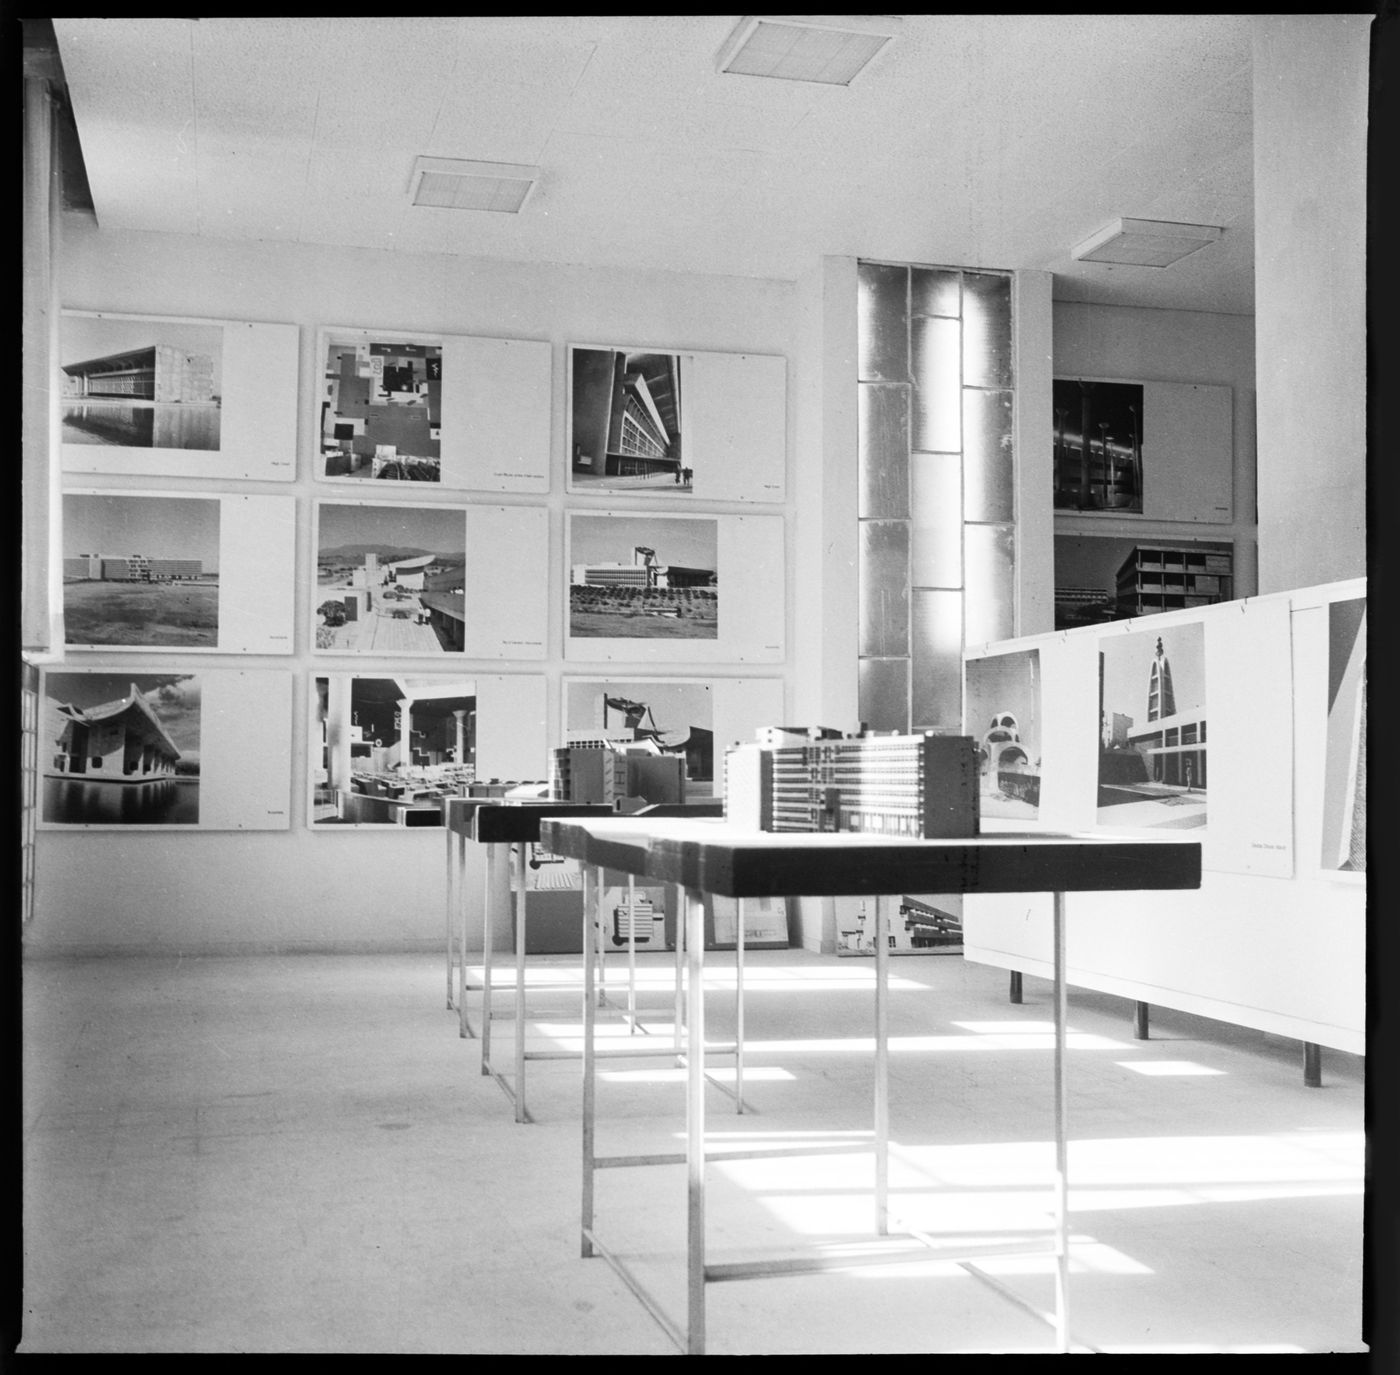 View of models and photographs of Chandigarh, possibly at an exhibition